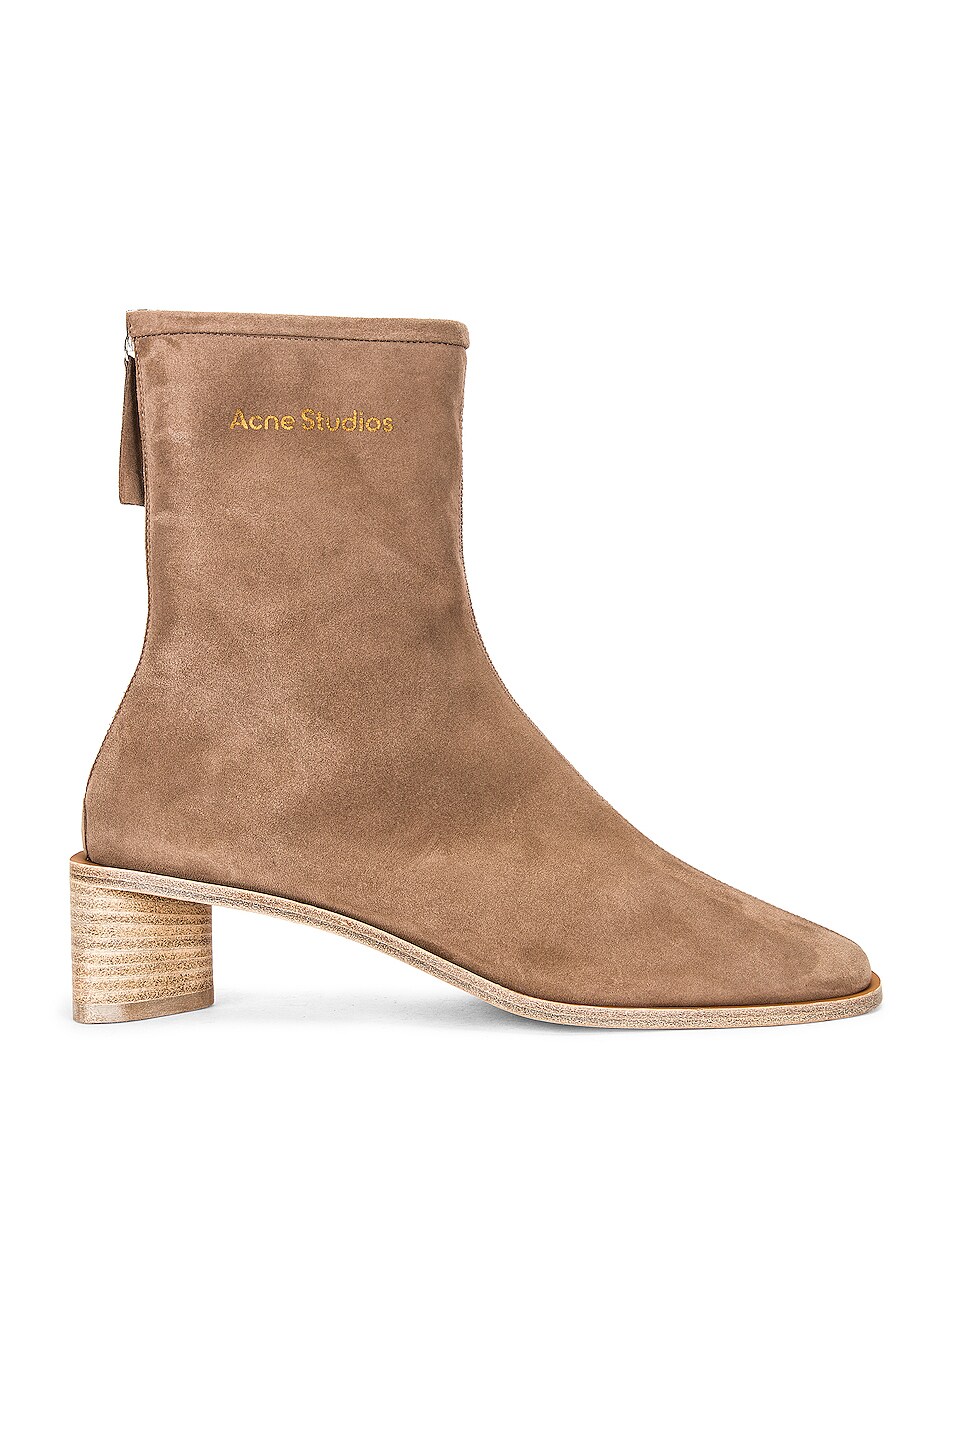 Image 1 of Acne Studios Pointed Ankle Boot in Beige & Ecru